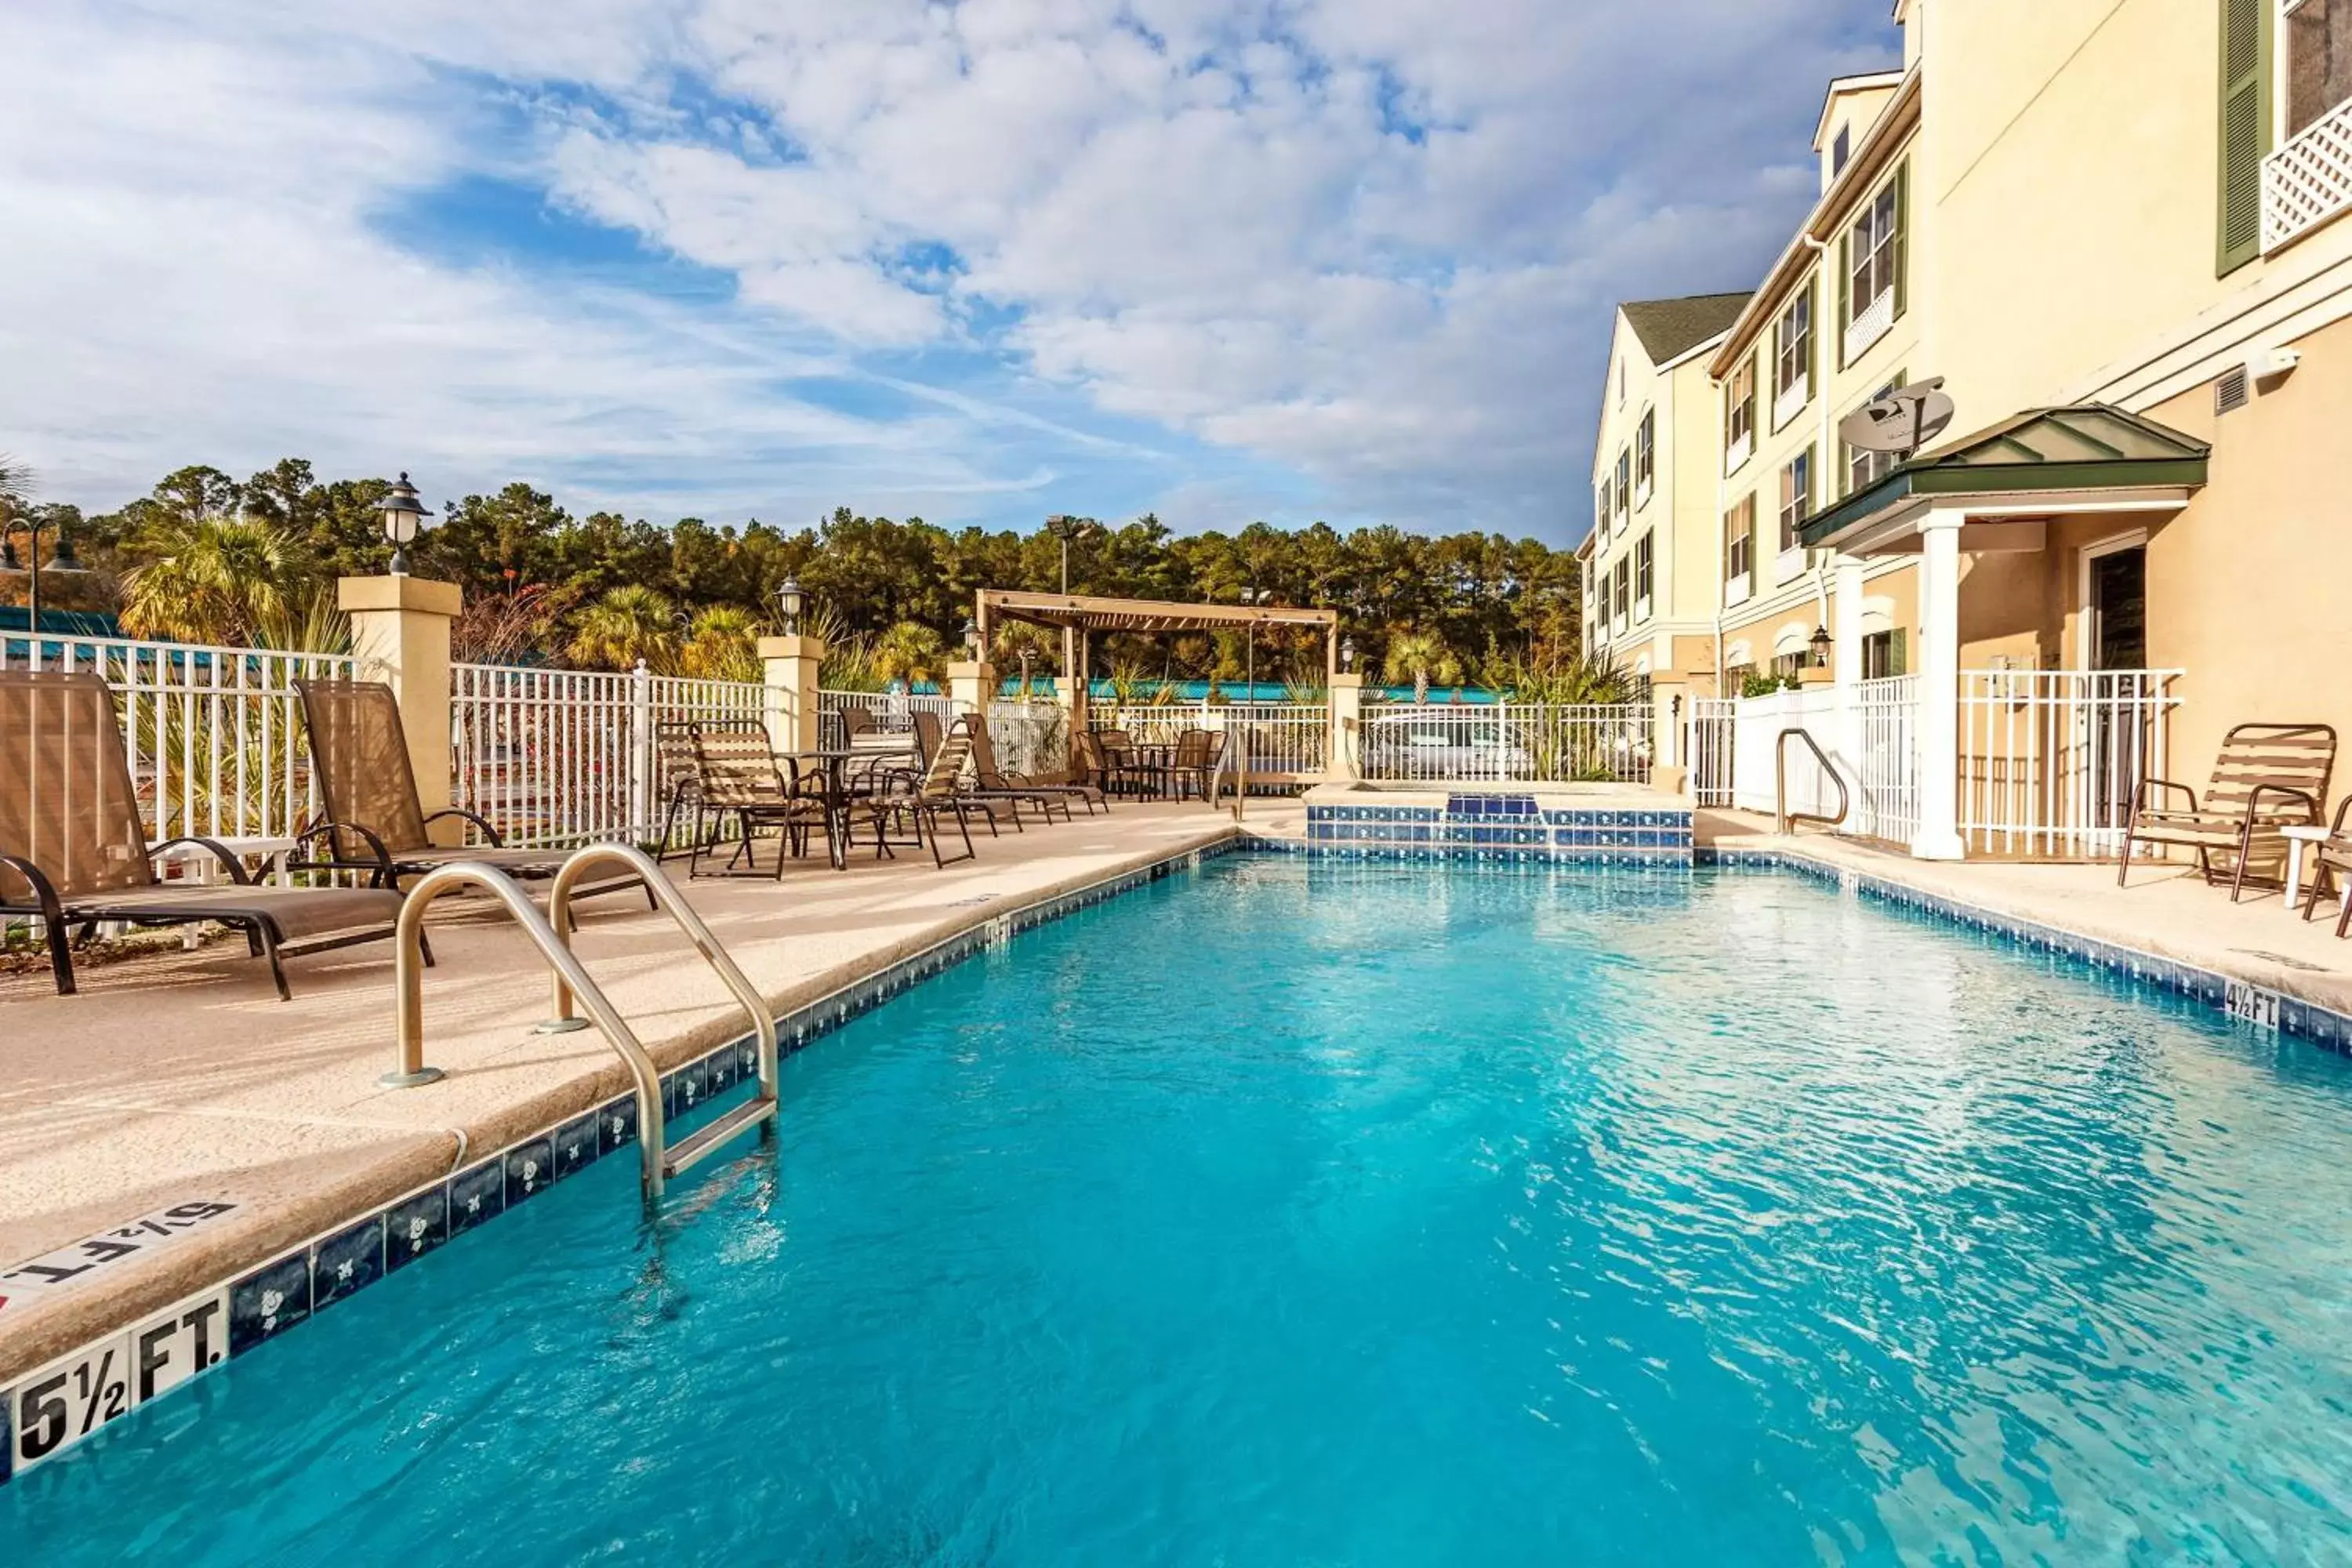 Activities in Country Inn & Suites by Radisson, Hinesville, GA